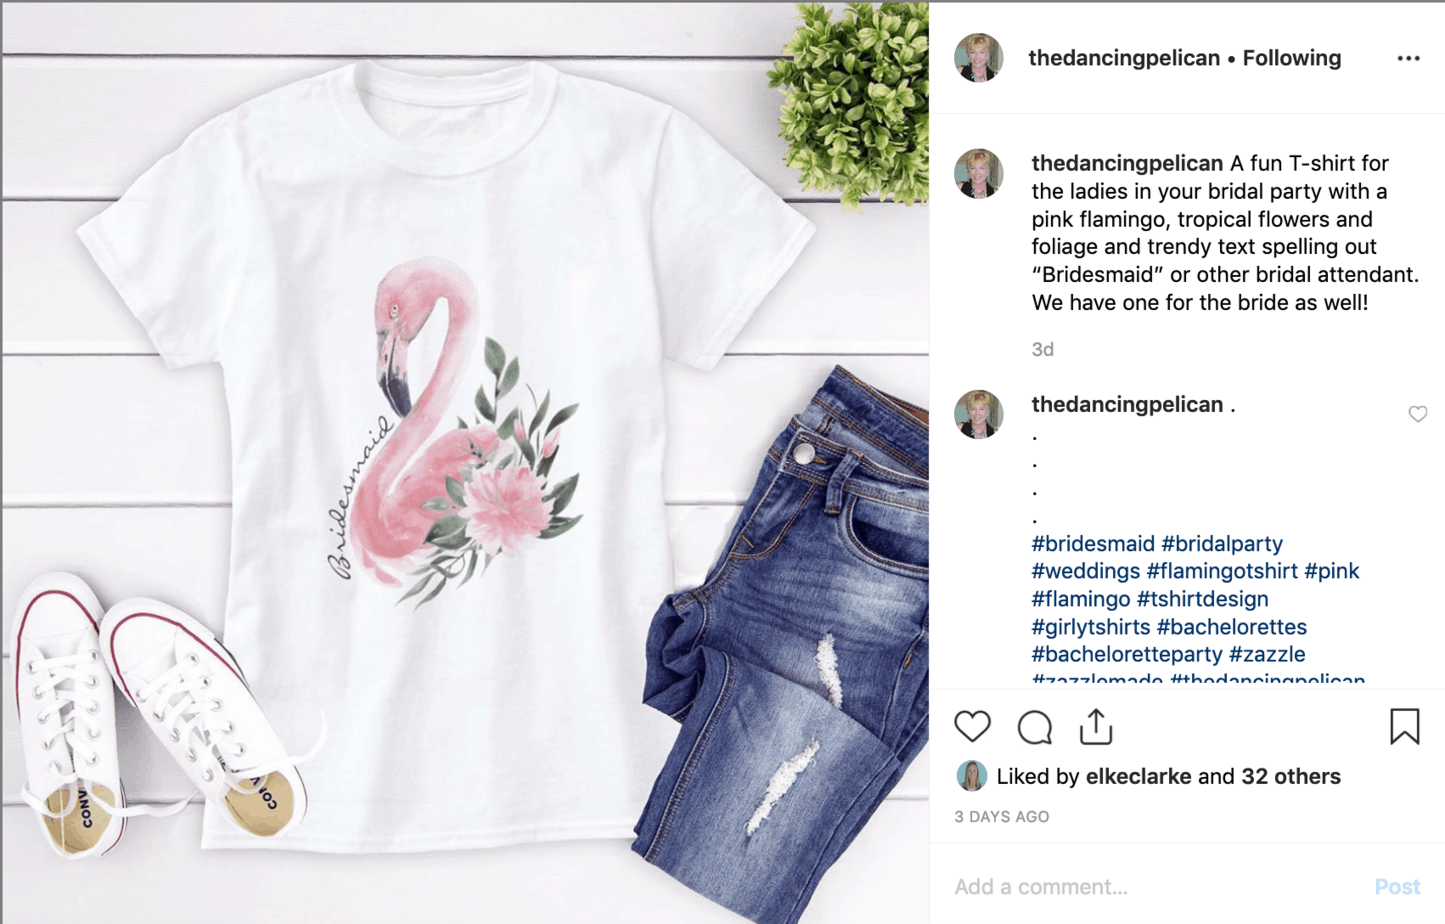 A beautiful staged photo Susan posted on Instagram of a t-shirt that TheDancingPelican sells on Zazzle. Click here to see the Instagram post. The post includes information about the Zazzle product. 